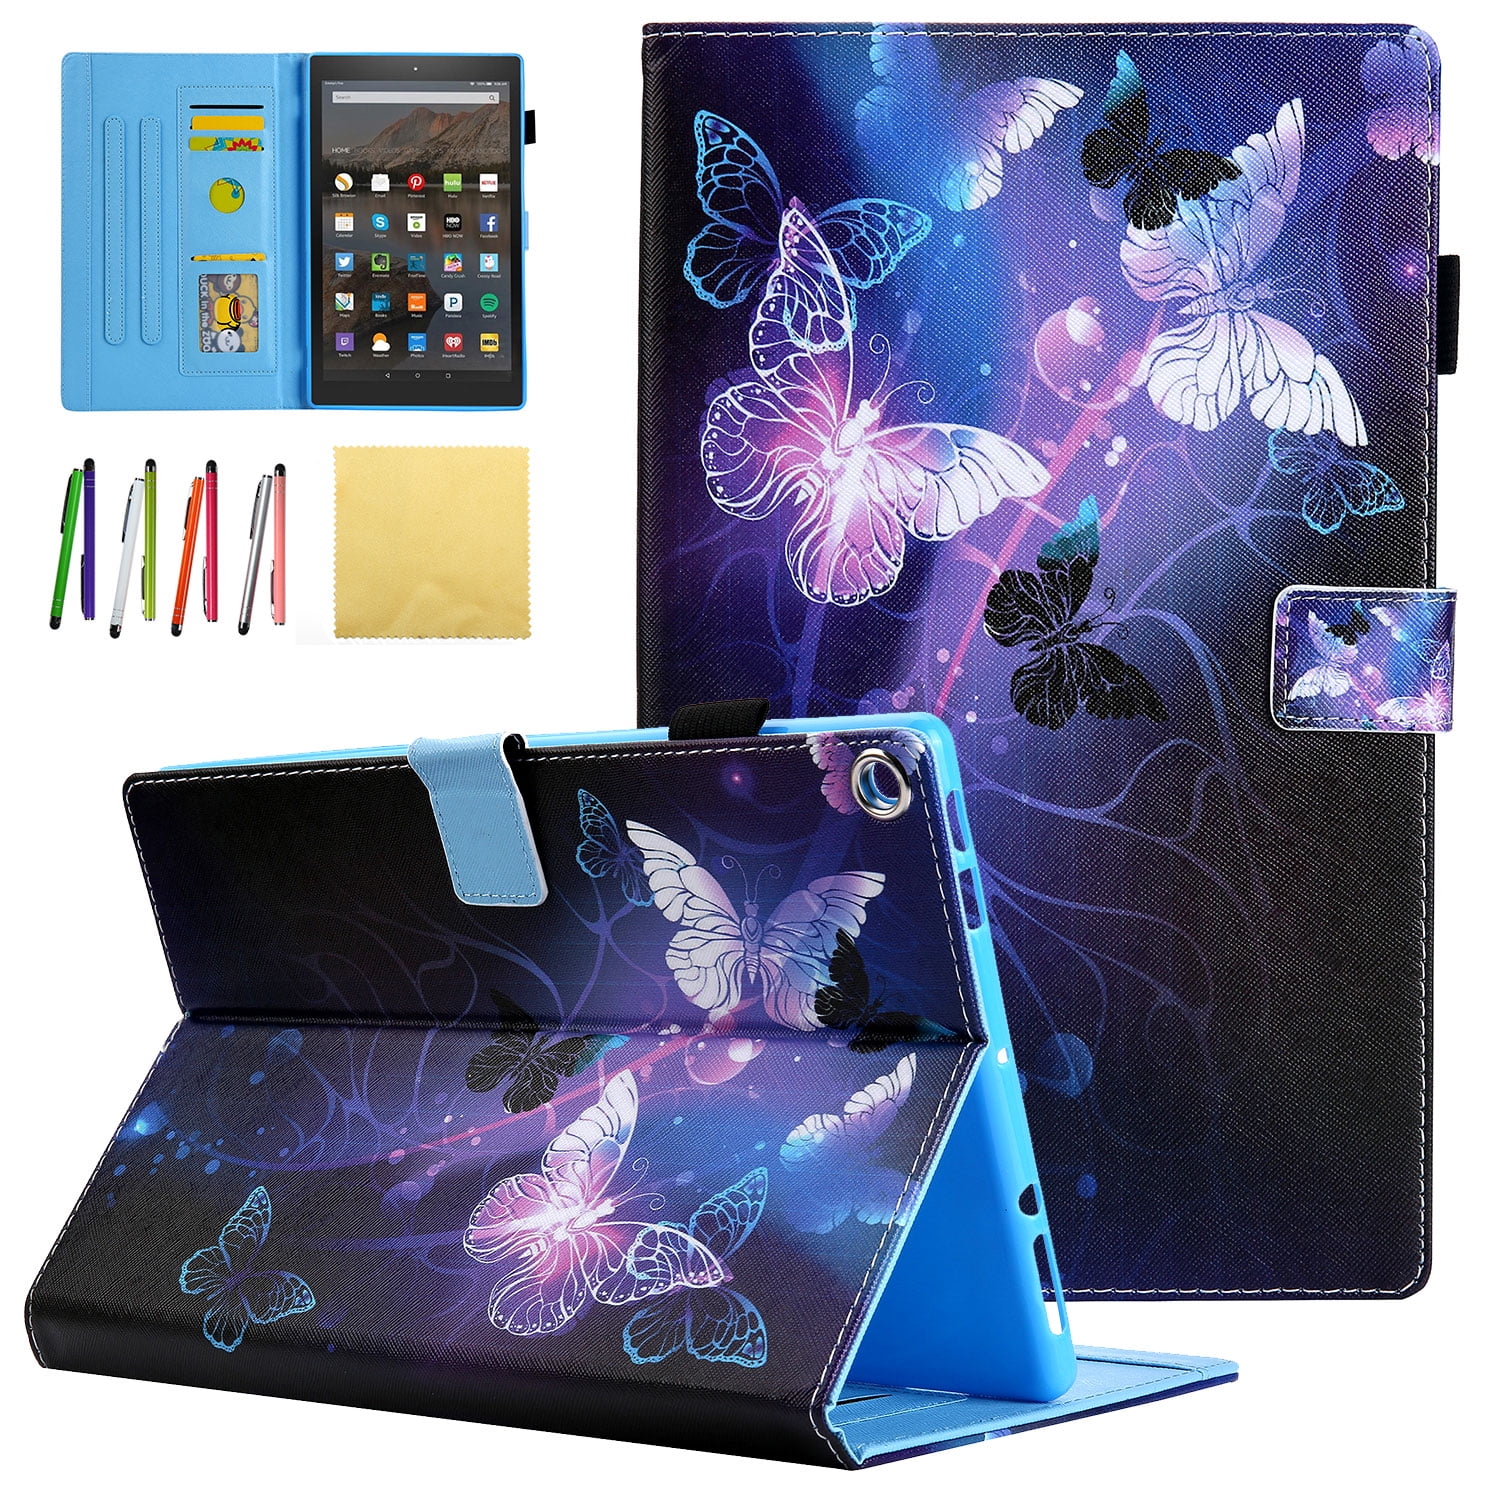 amazon fire hd 10 tablet cover